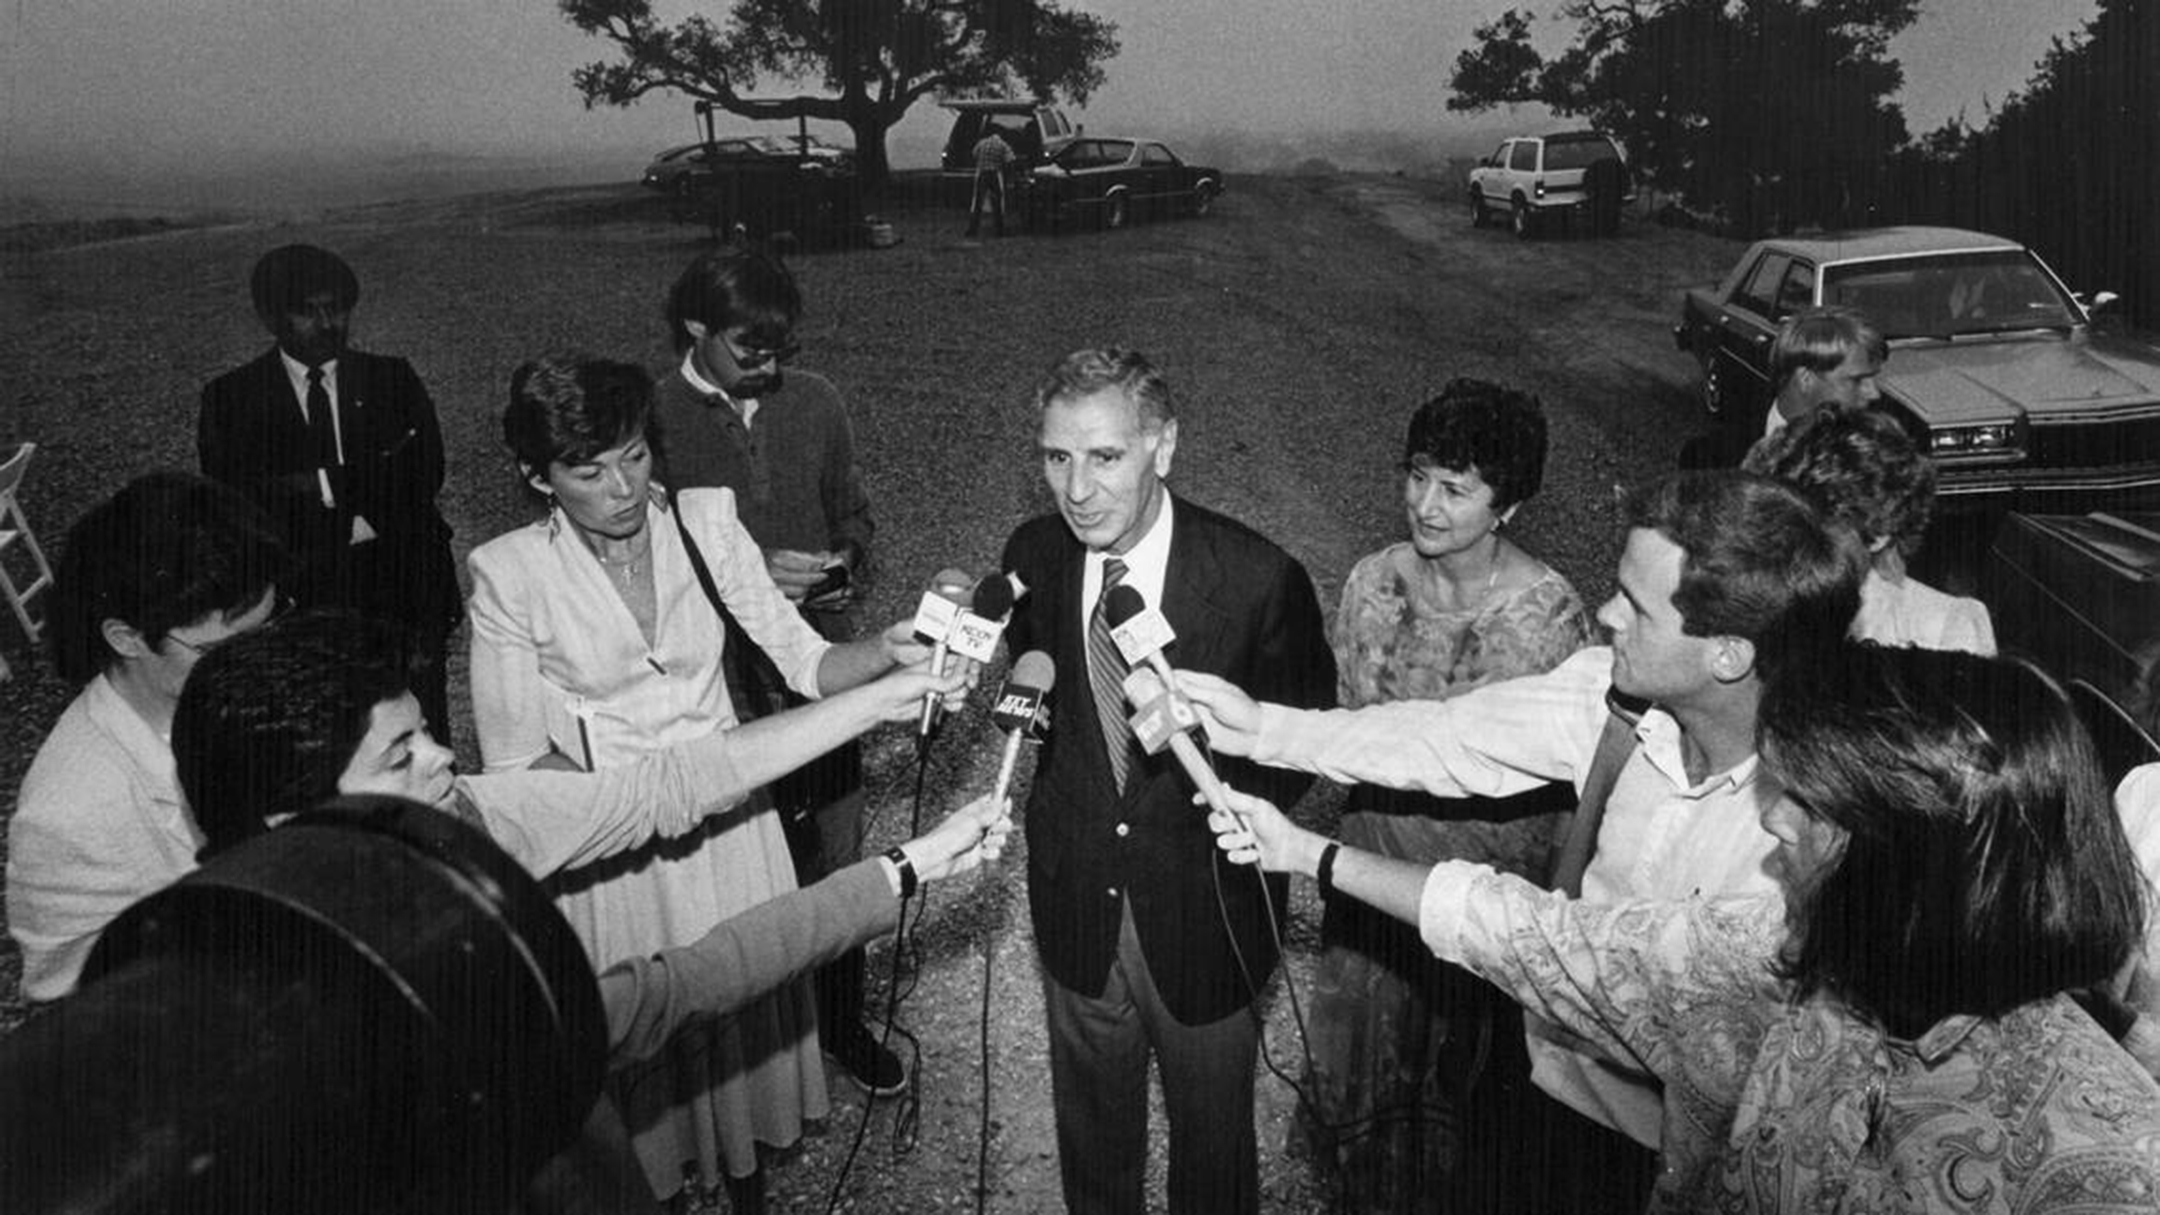 Black and white photo of former California governor George Deukmejian standing in a scrum of reporters with microphones pointed at him